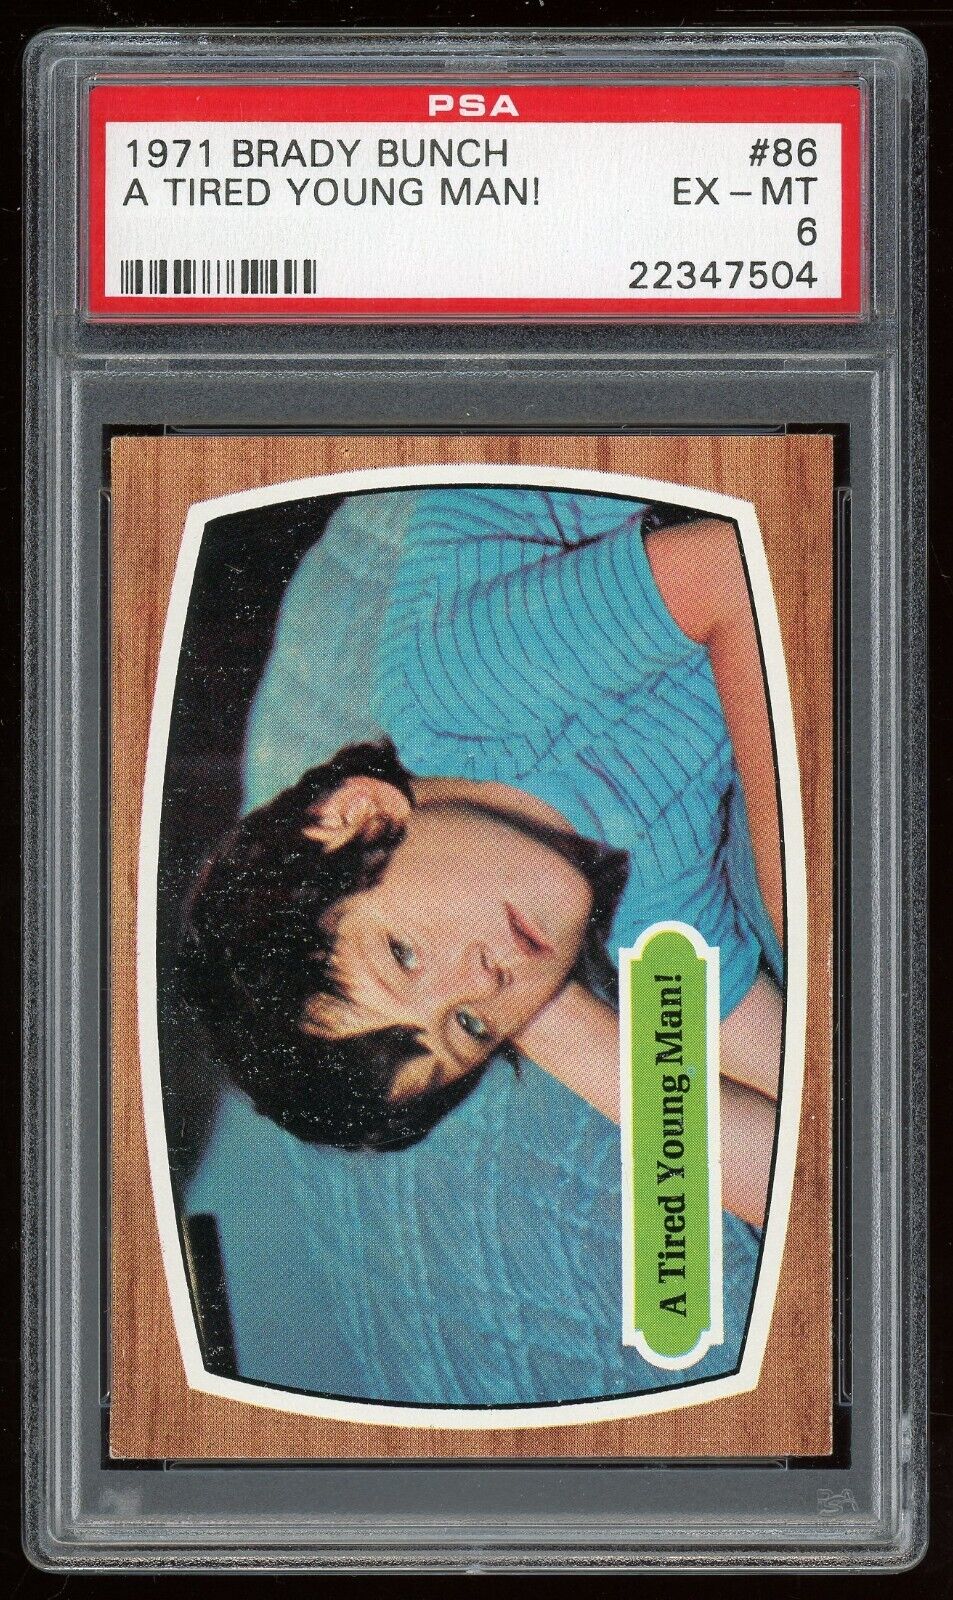 1971 Topps Brady Bunch Trading Card #86 A Tired Young Man PSA 6